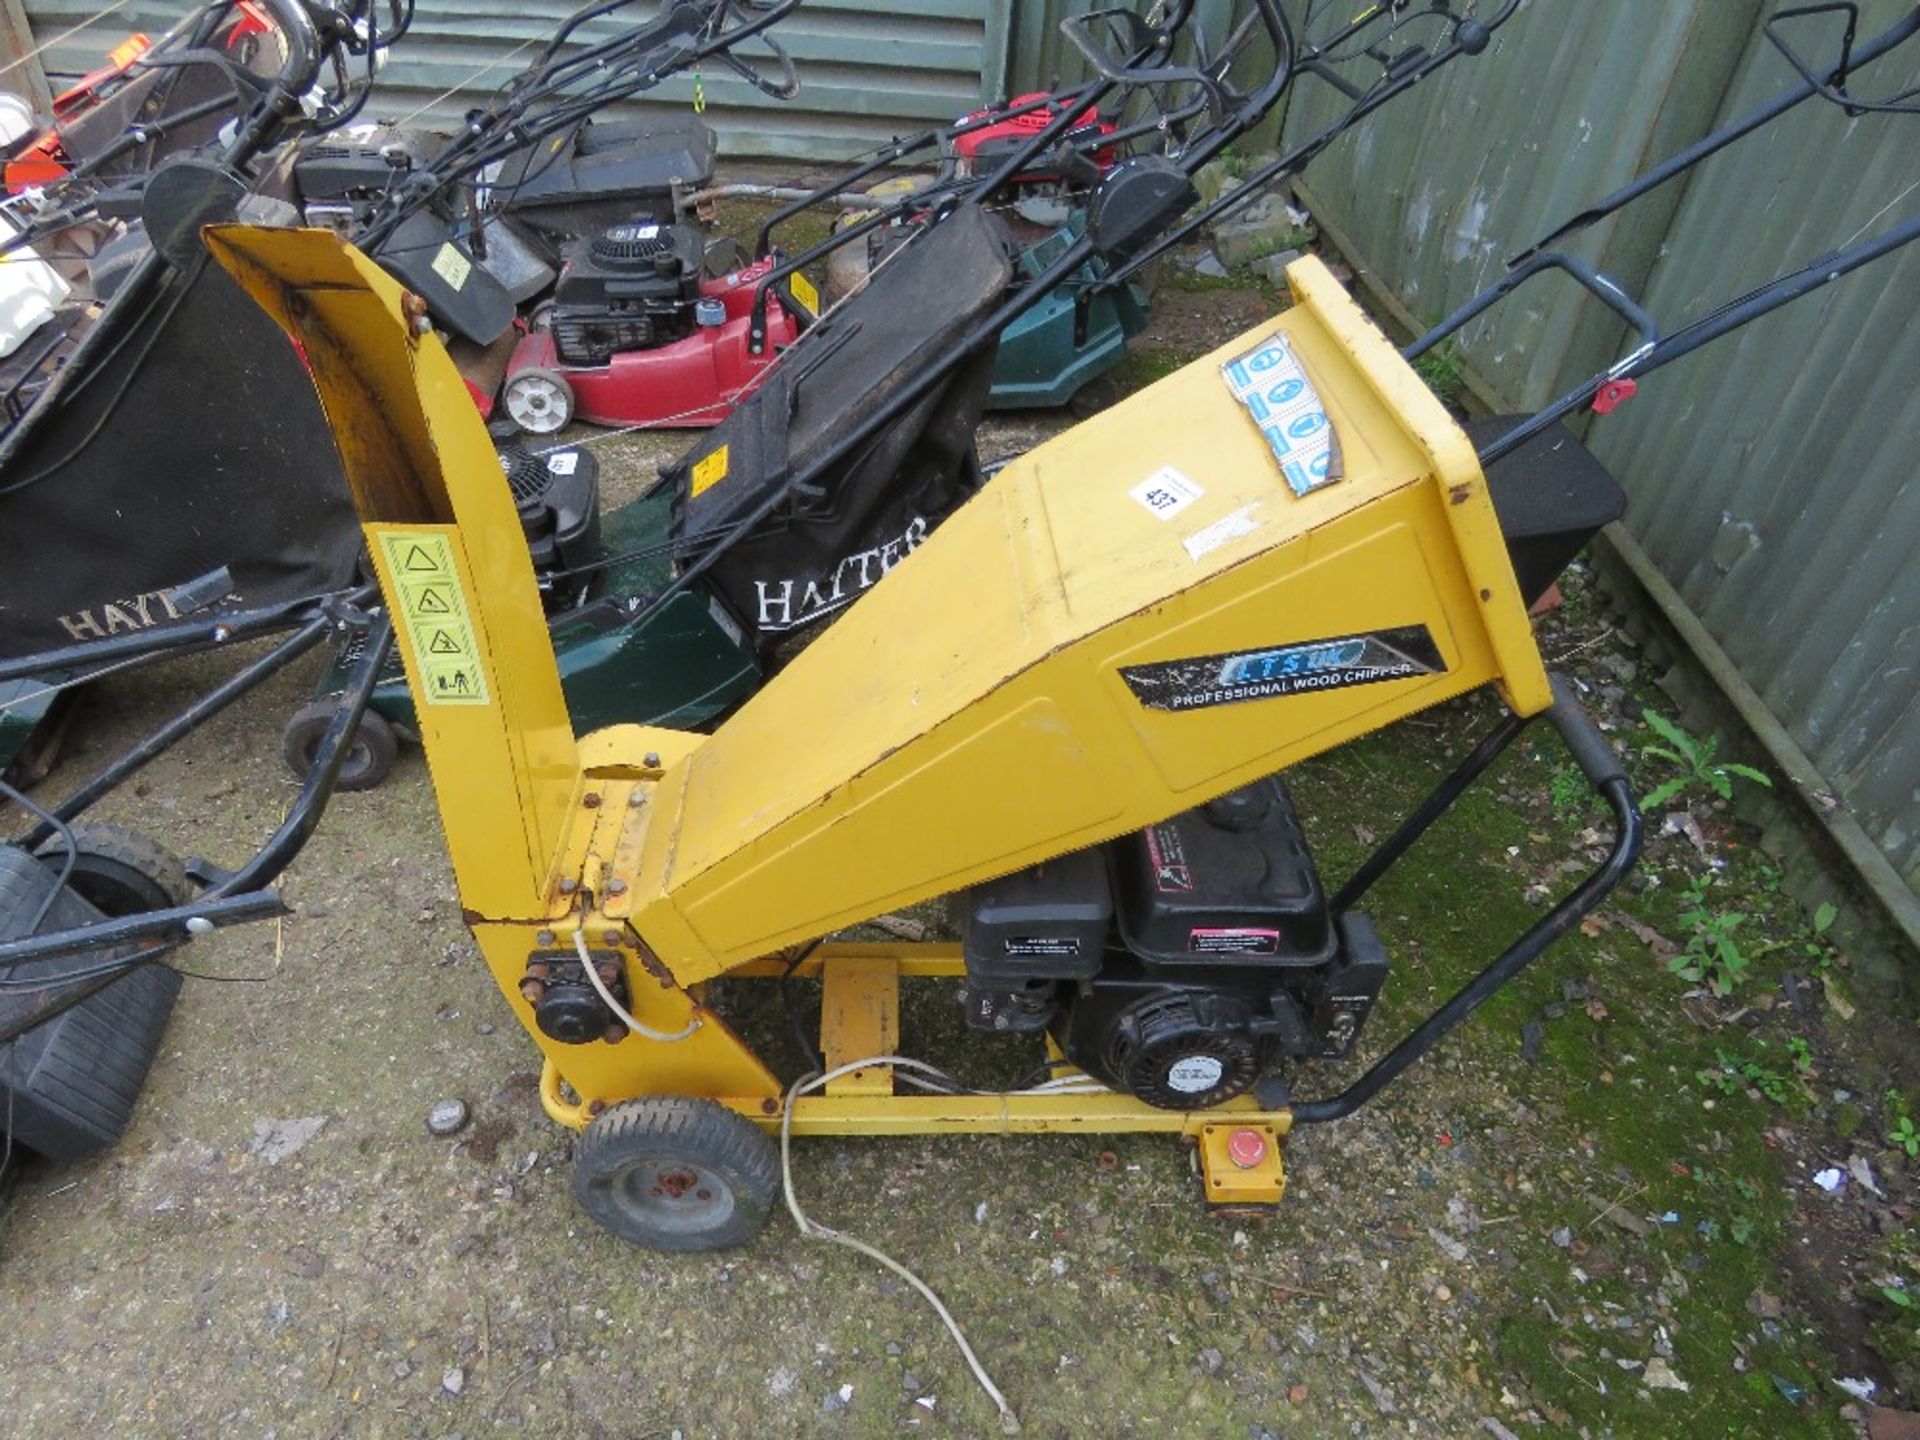 PETROL ENGINED GARDEN CHIPPER/SHREDDER.....THIS LOT IS SOLD UNDER THE AUCTIONEERS MARGIN SCHEME, THE